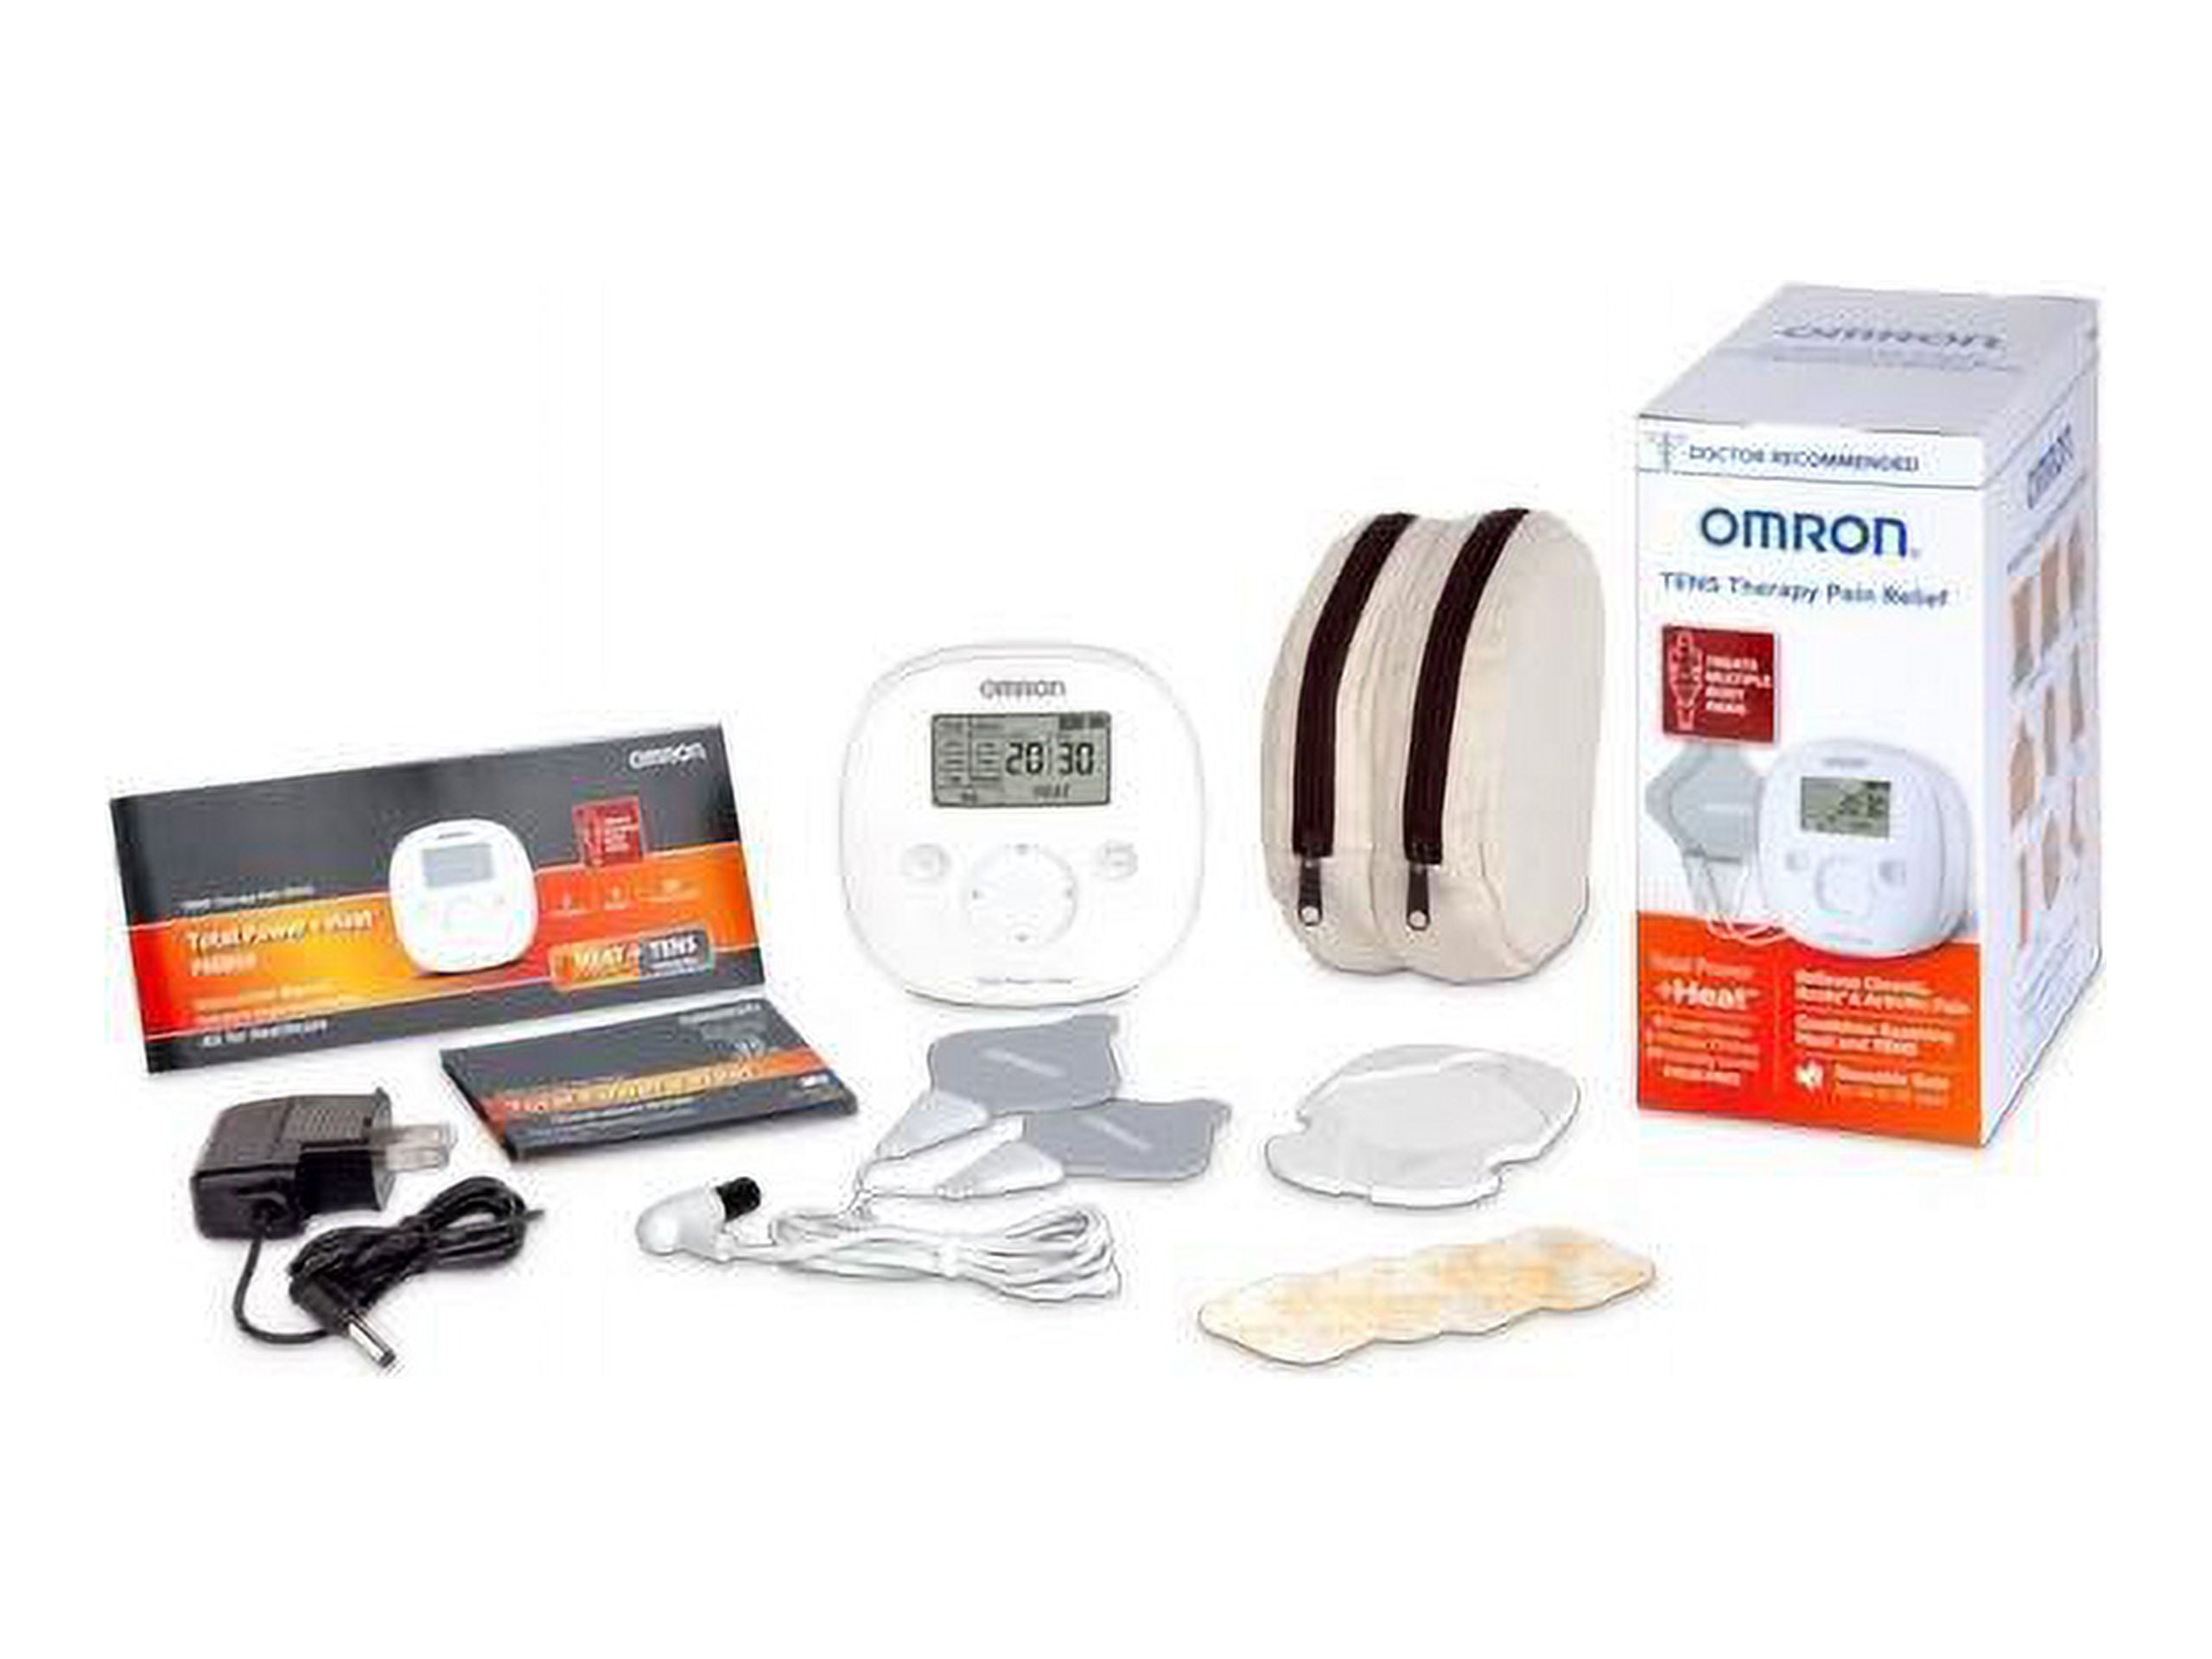 OMRON Healthcare PM800 Total Power with Heat Tens Unit Therapy Pain Relief  for sale online